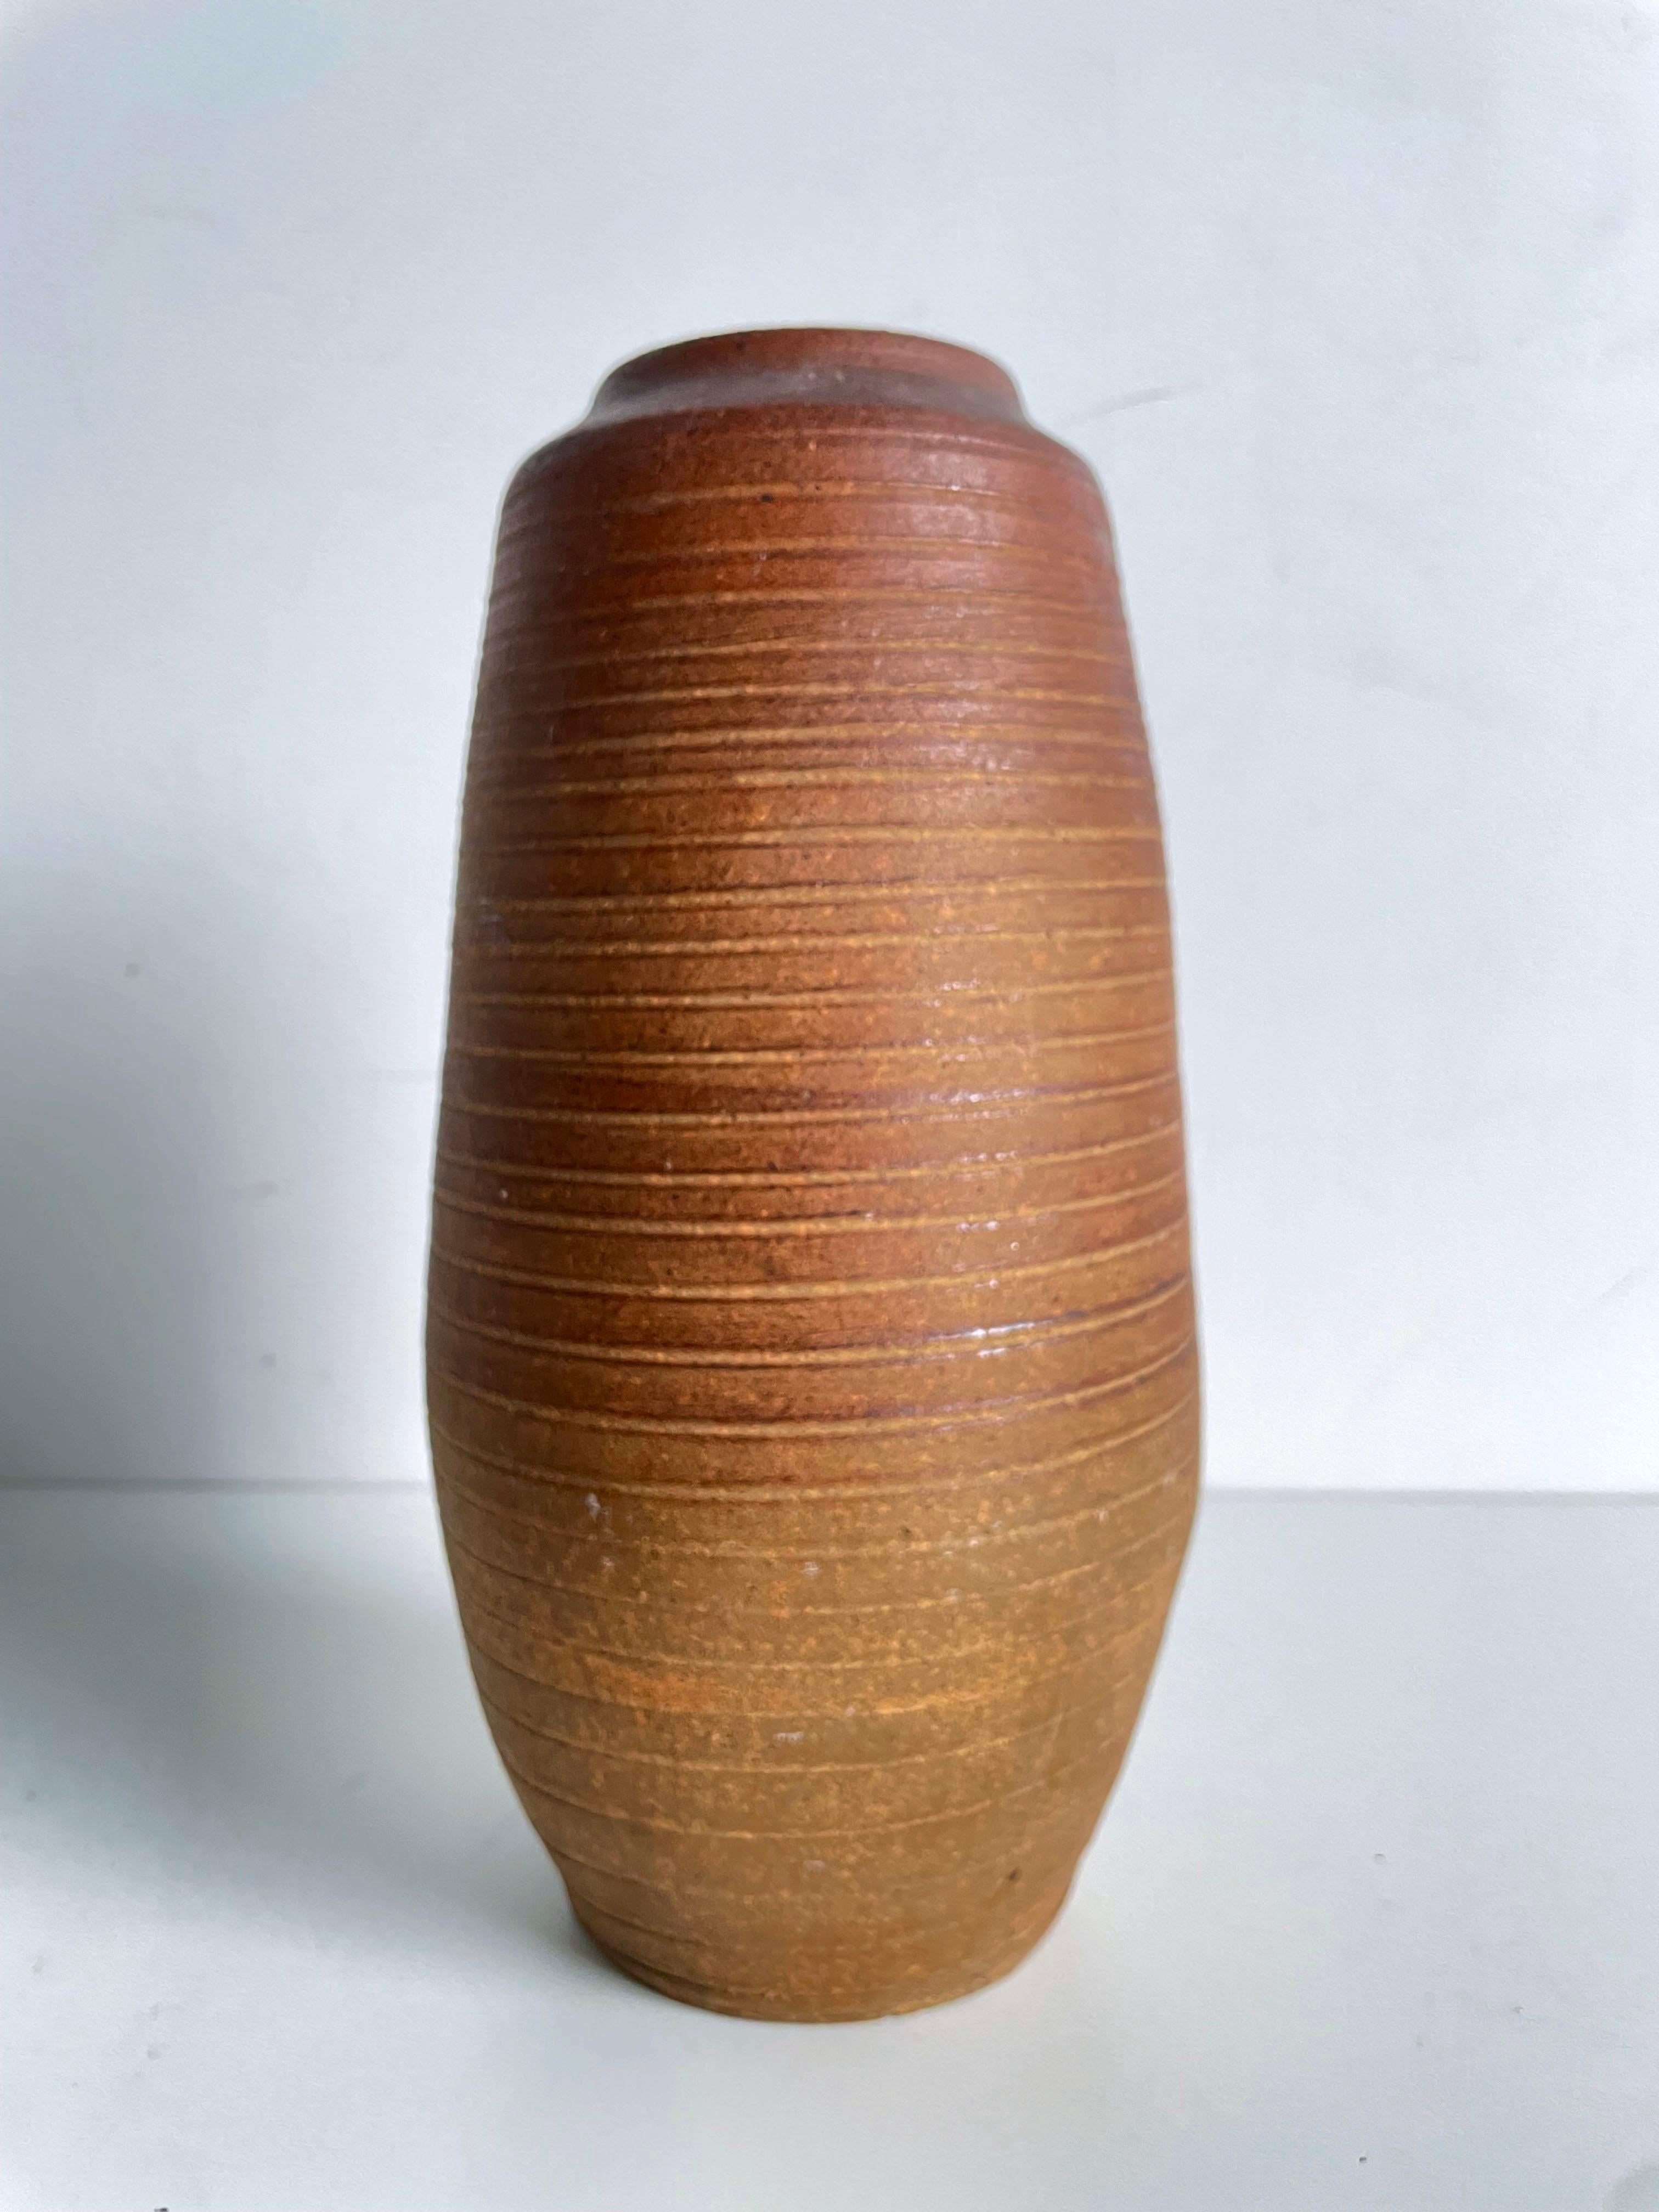 Hand-Crafted Vintage Teracotta Vase with textured surface, Wabi Sabi, Studio Pottery, Marked For Sale